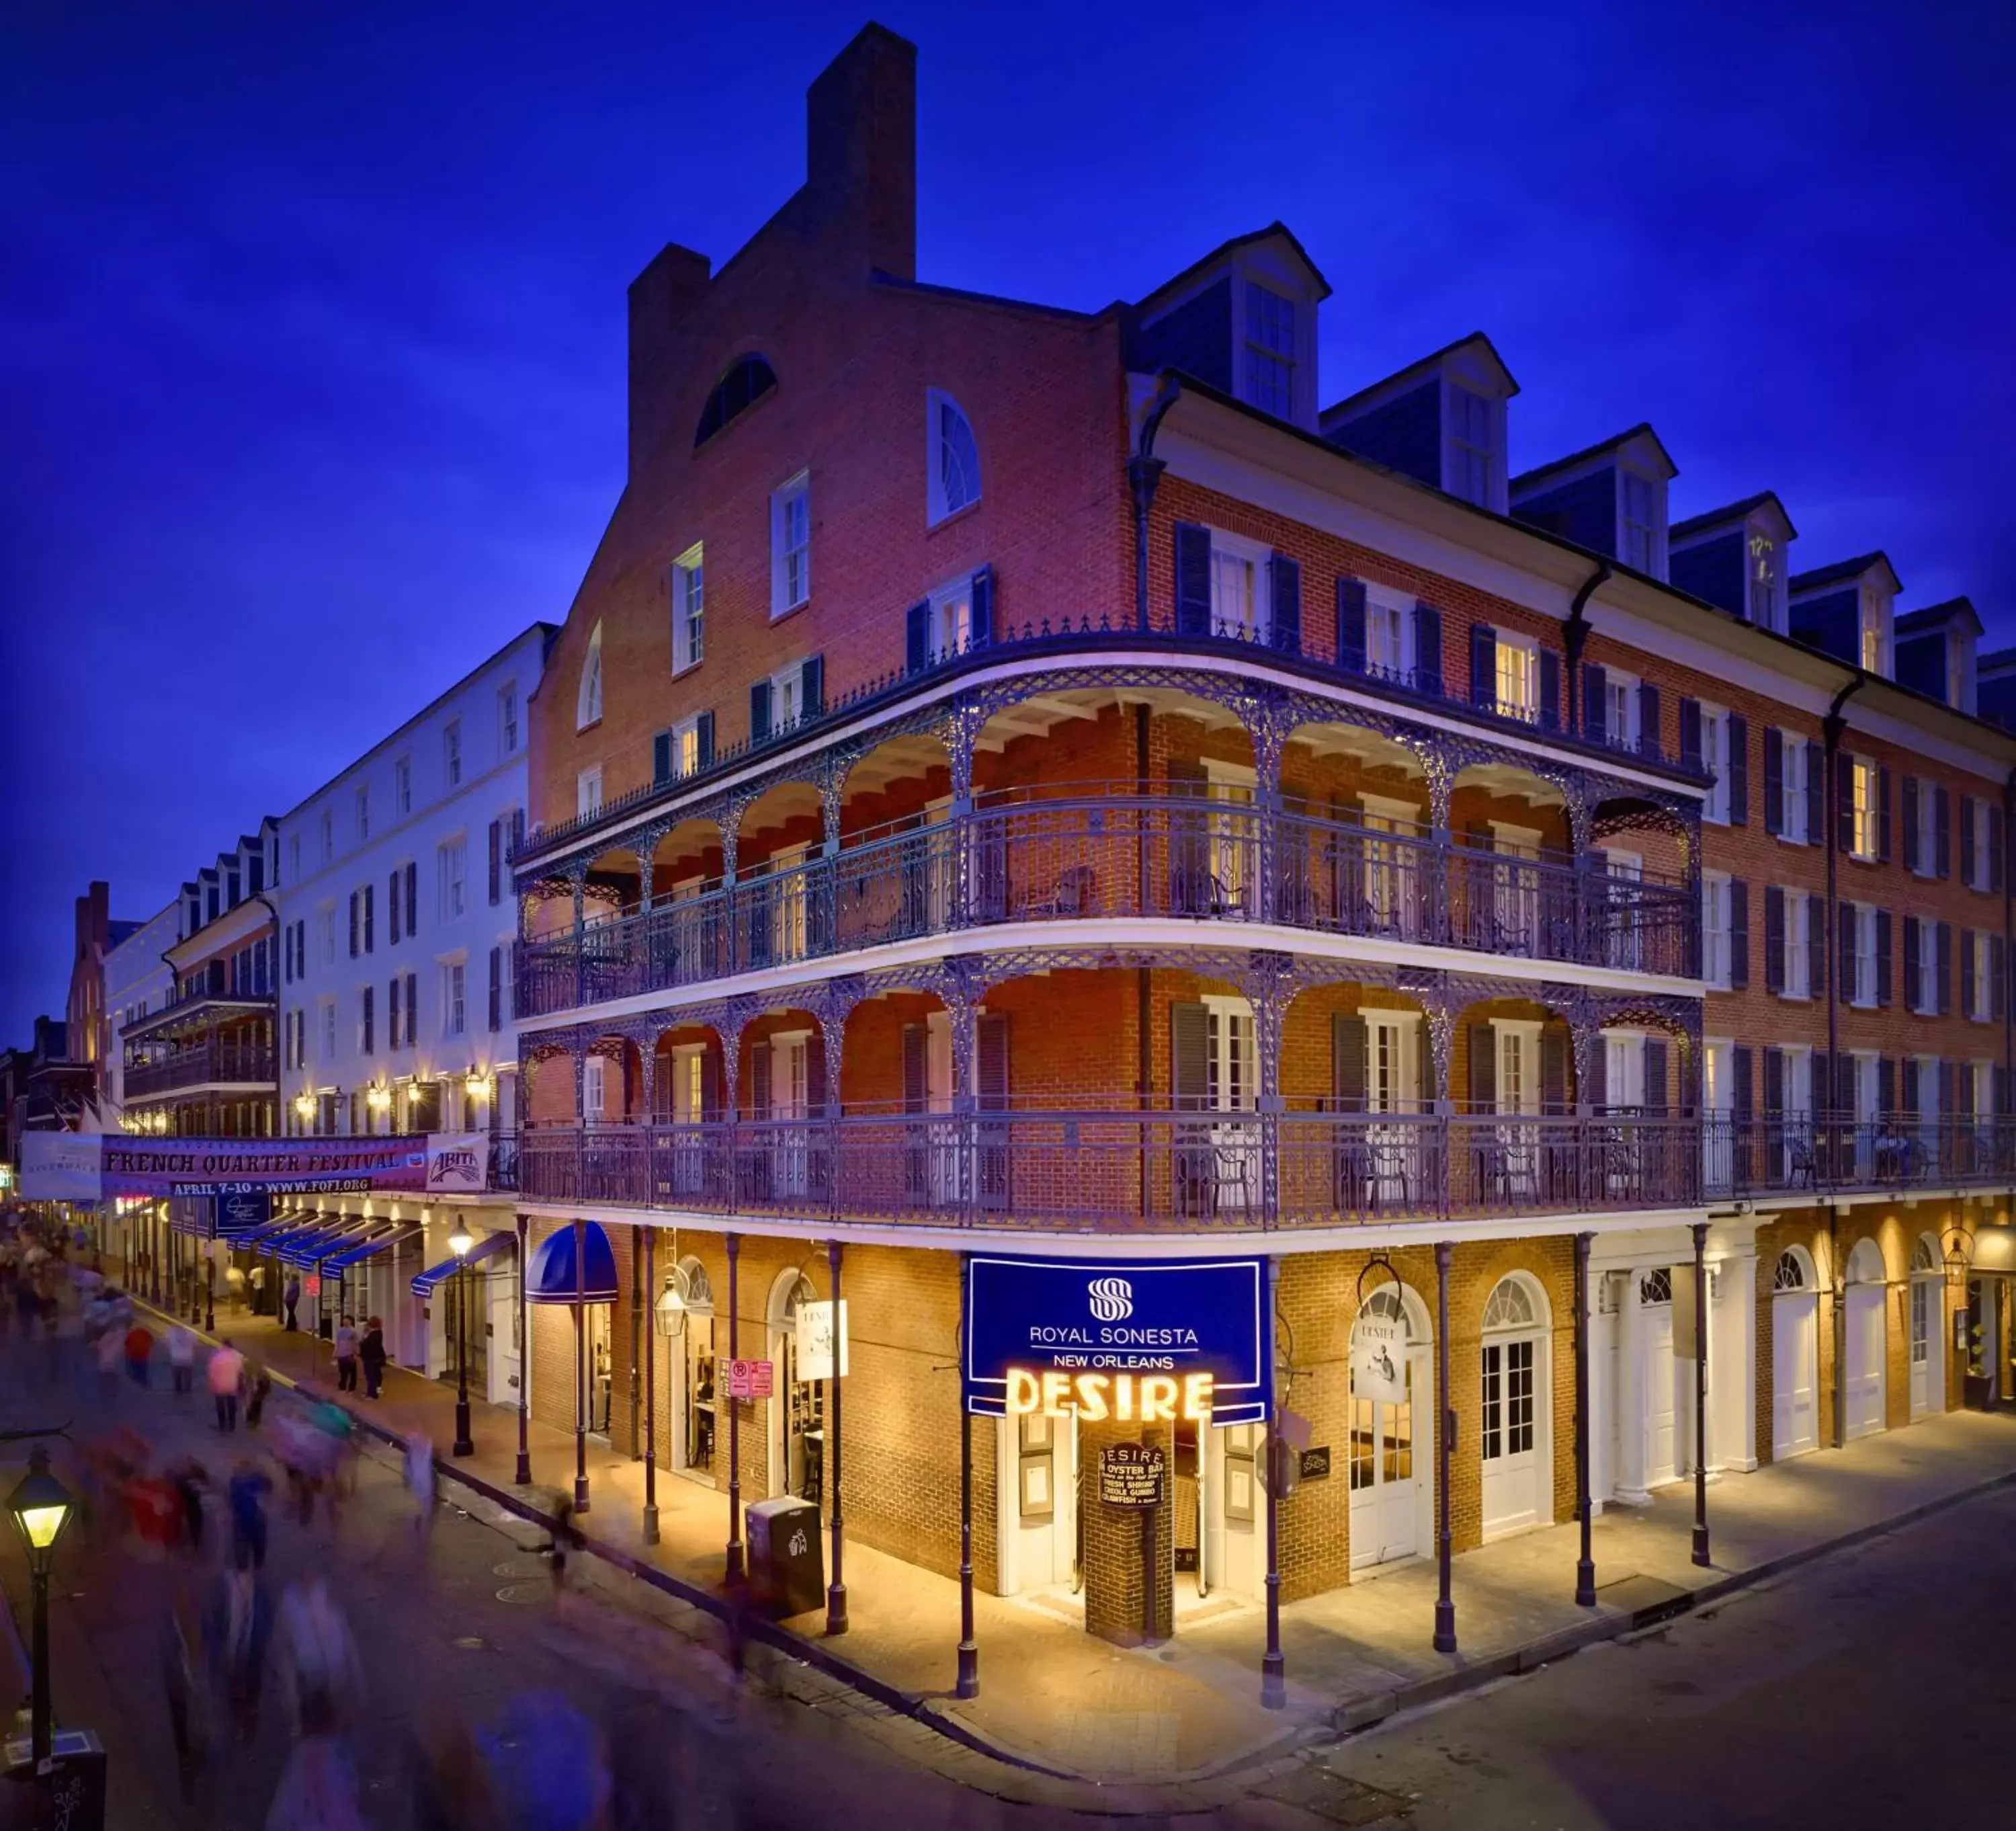 Property building in The Royal Sonesta New Orleans